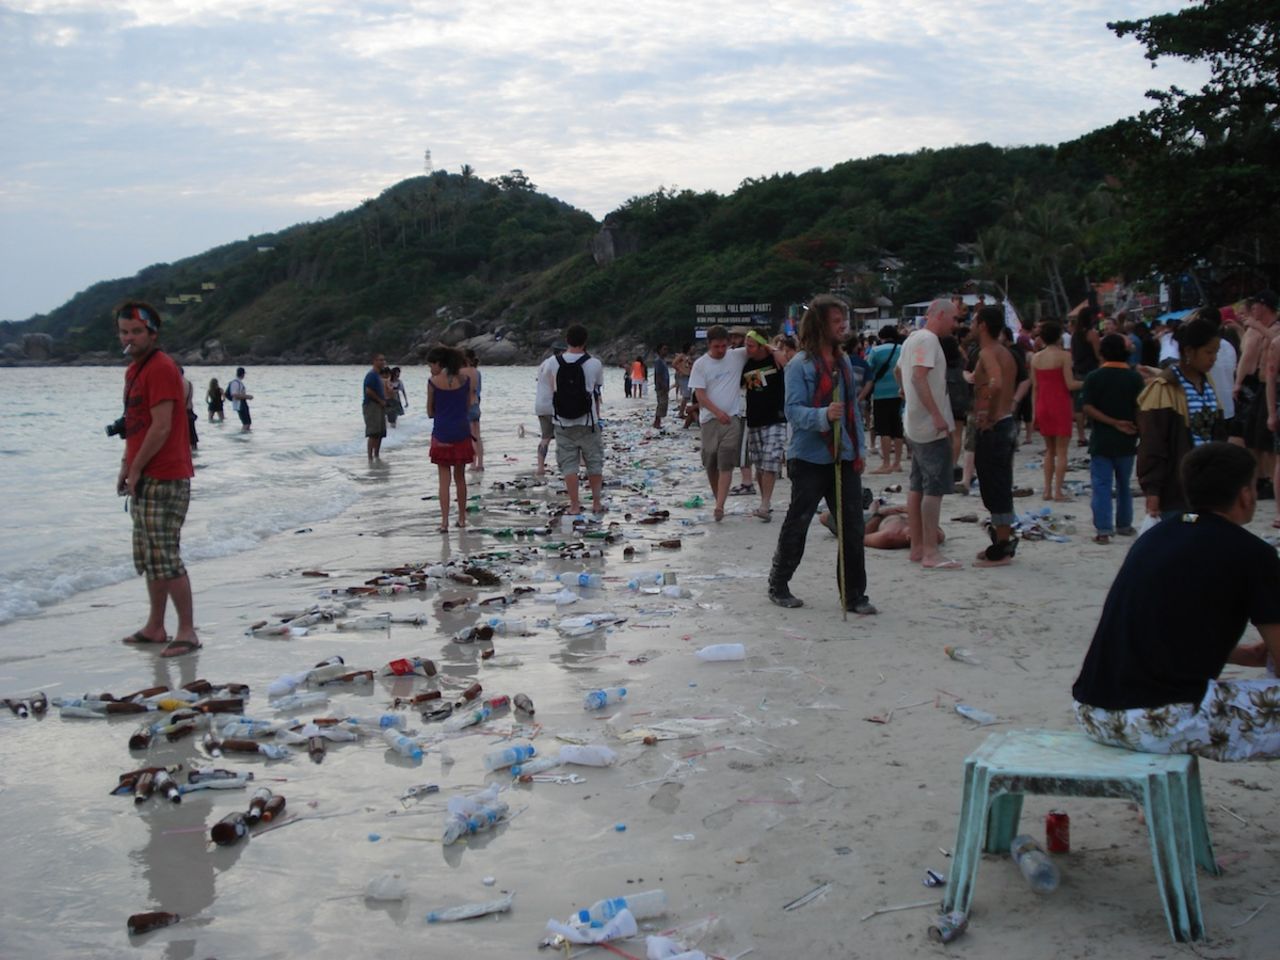 Tourism hangover: Koh Pha Ngan beach after full moon party.